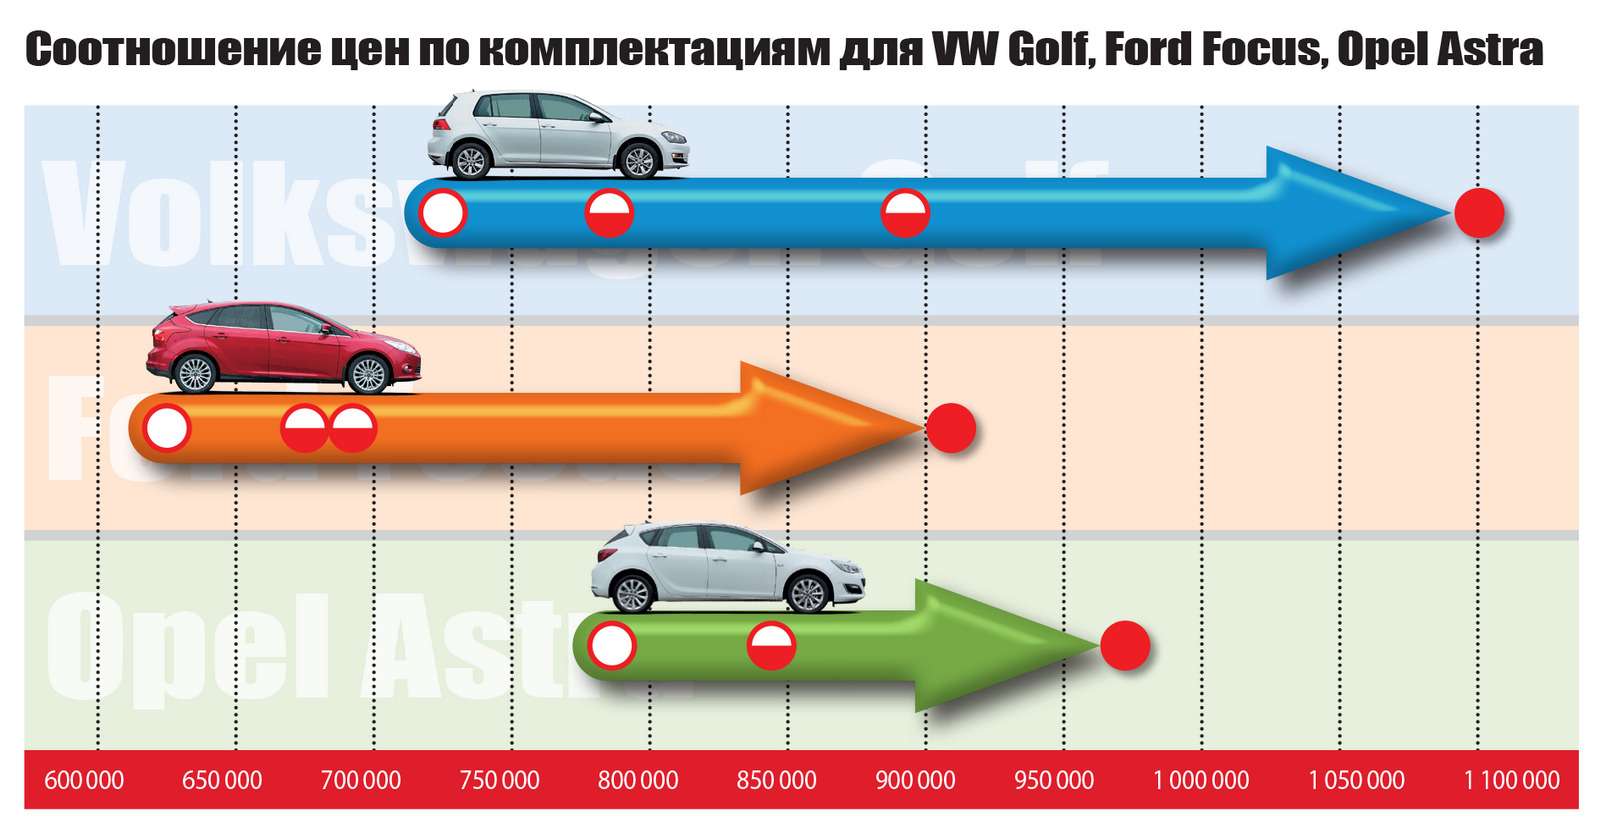 VW Golf, Ford Focus и Opel Astra